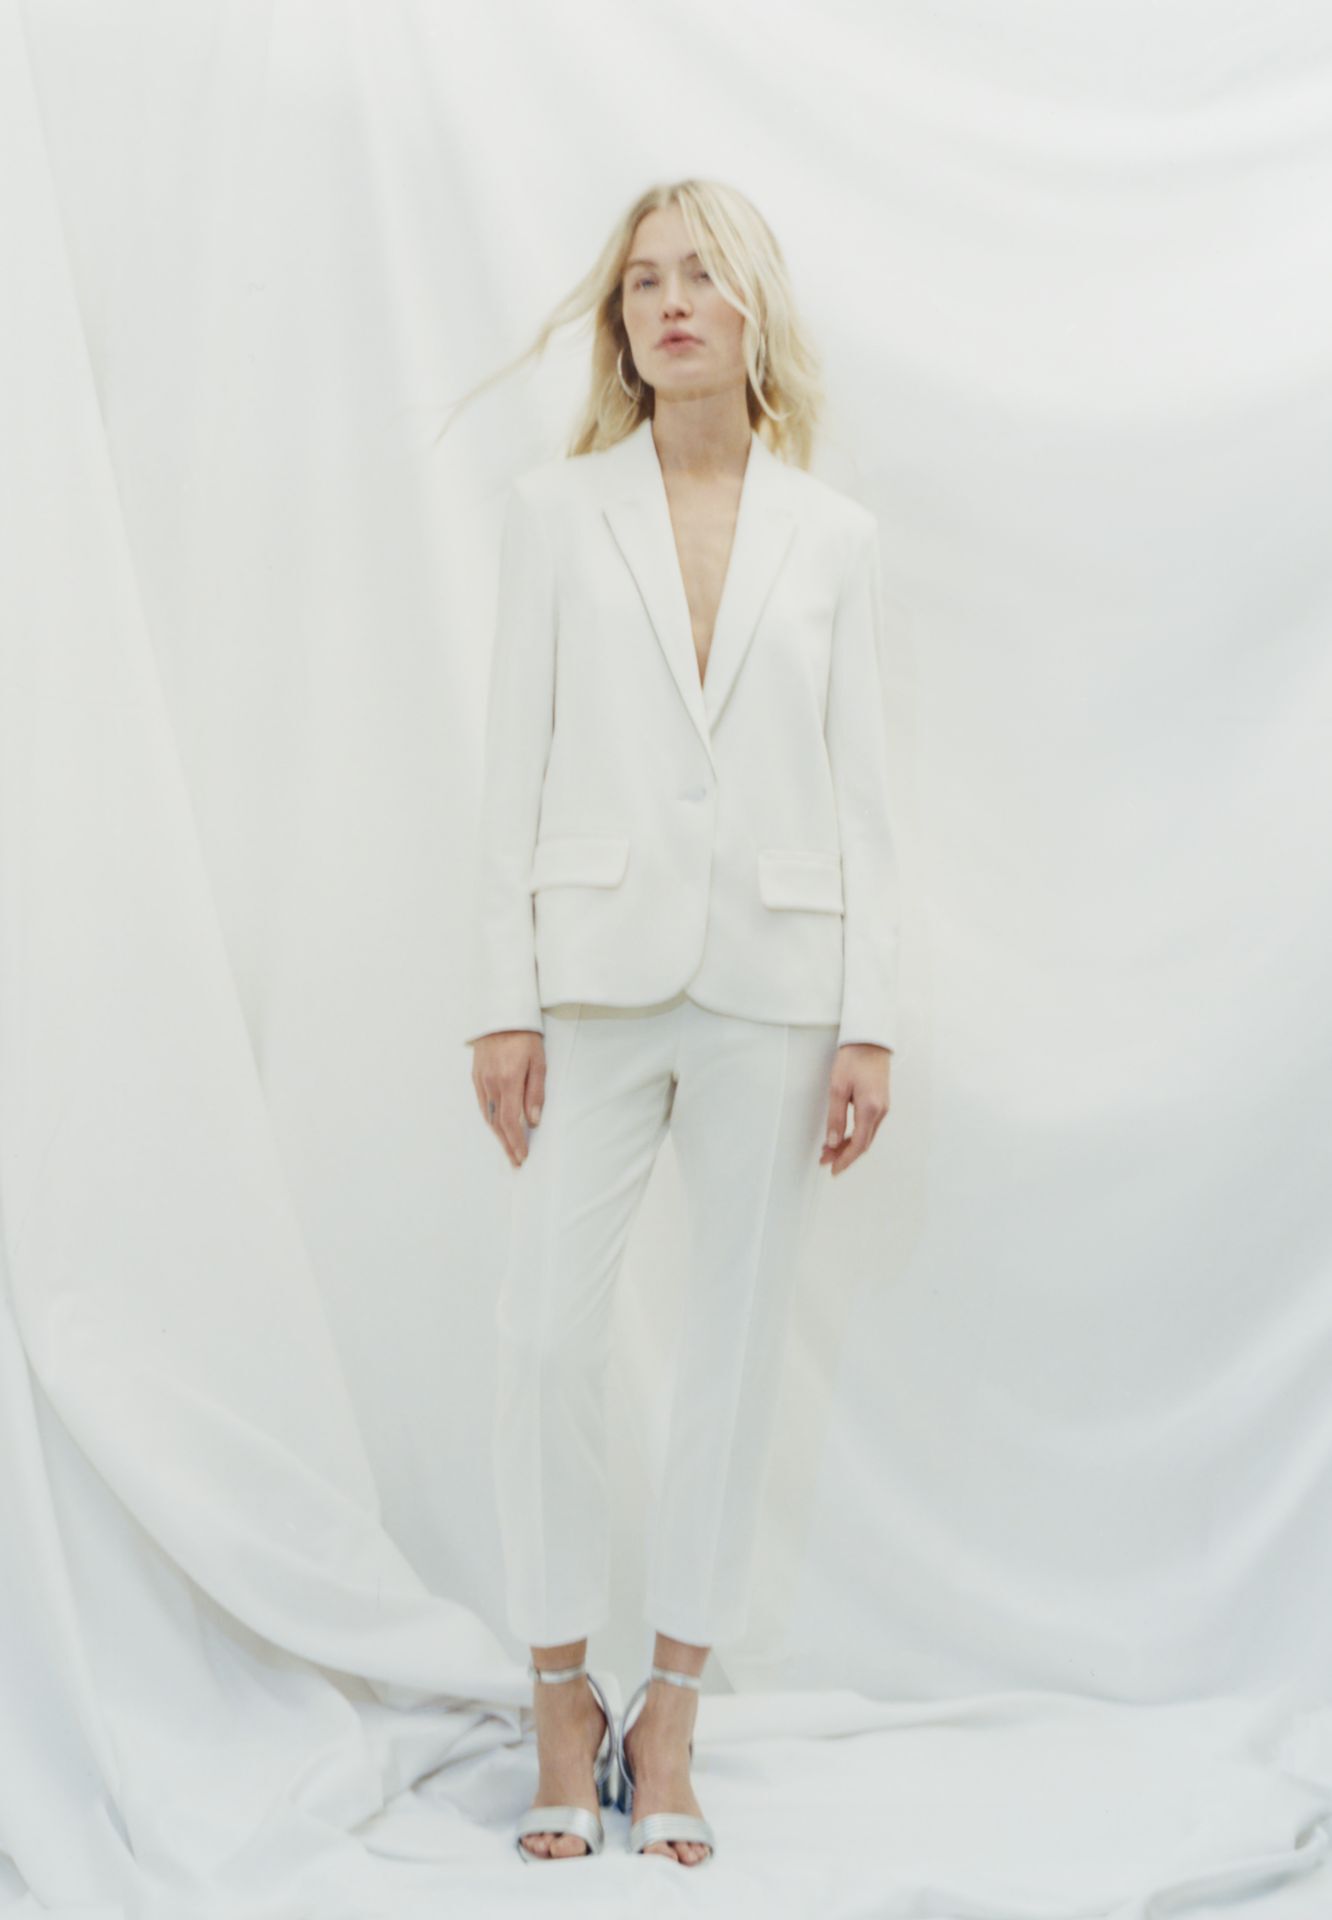 Women's white suit jacket with microbeading